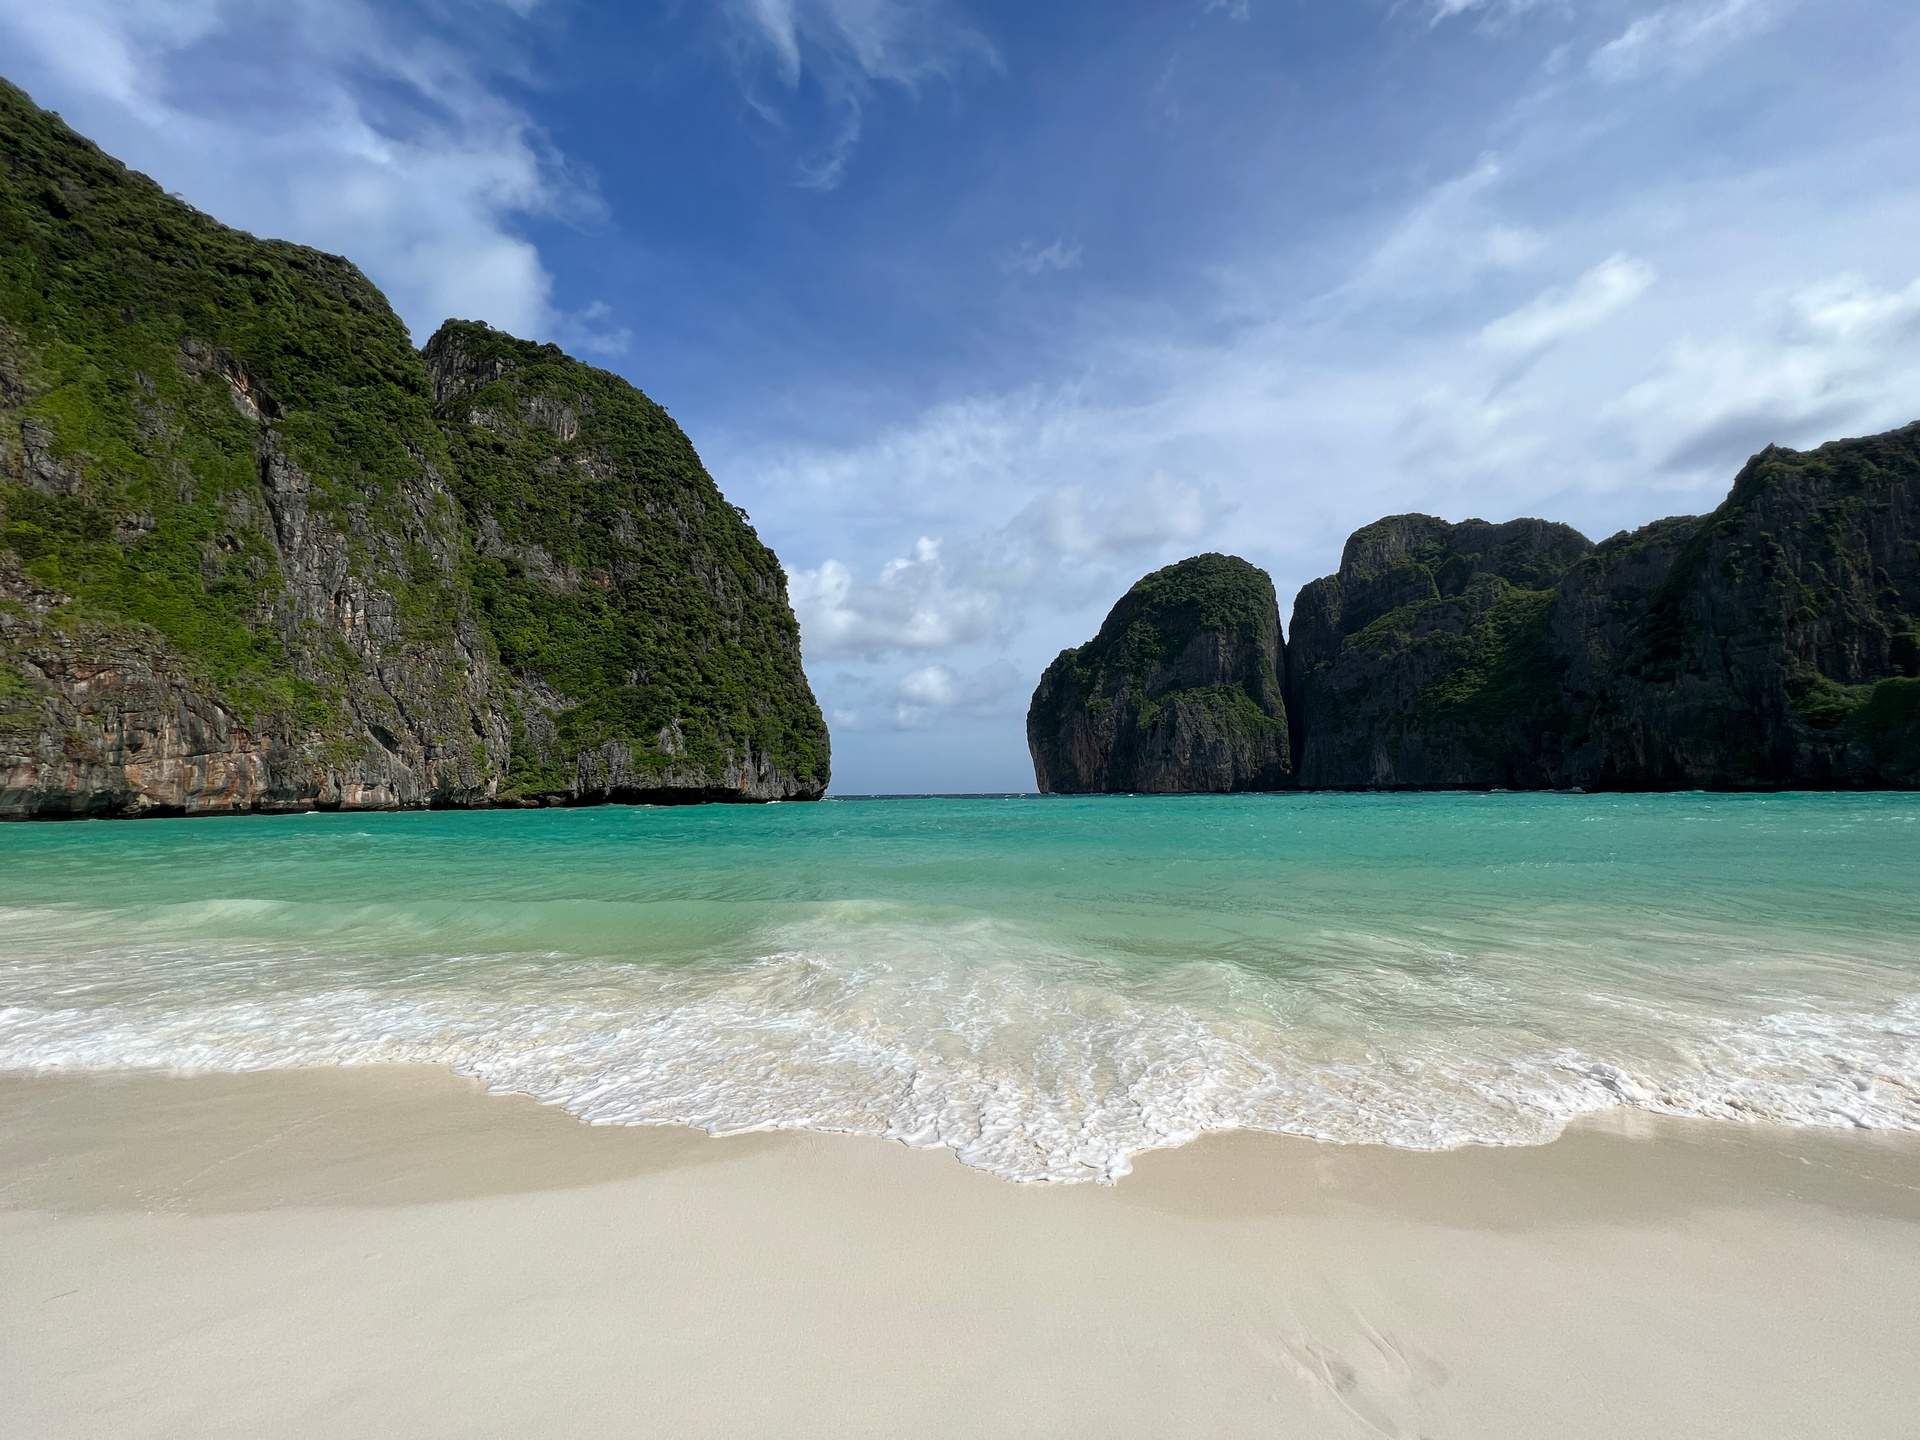 Maya Bay beach in Thailand. Boat ride from hell, island hopping from heaven